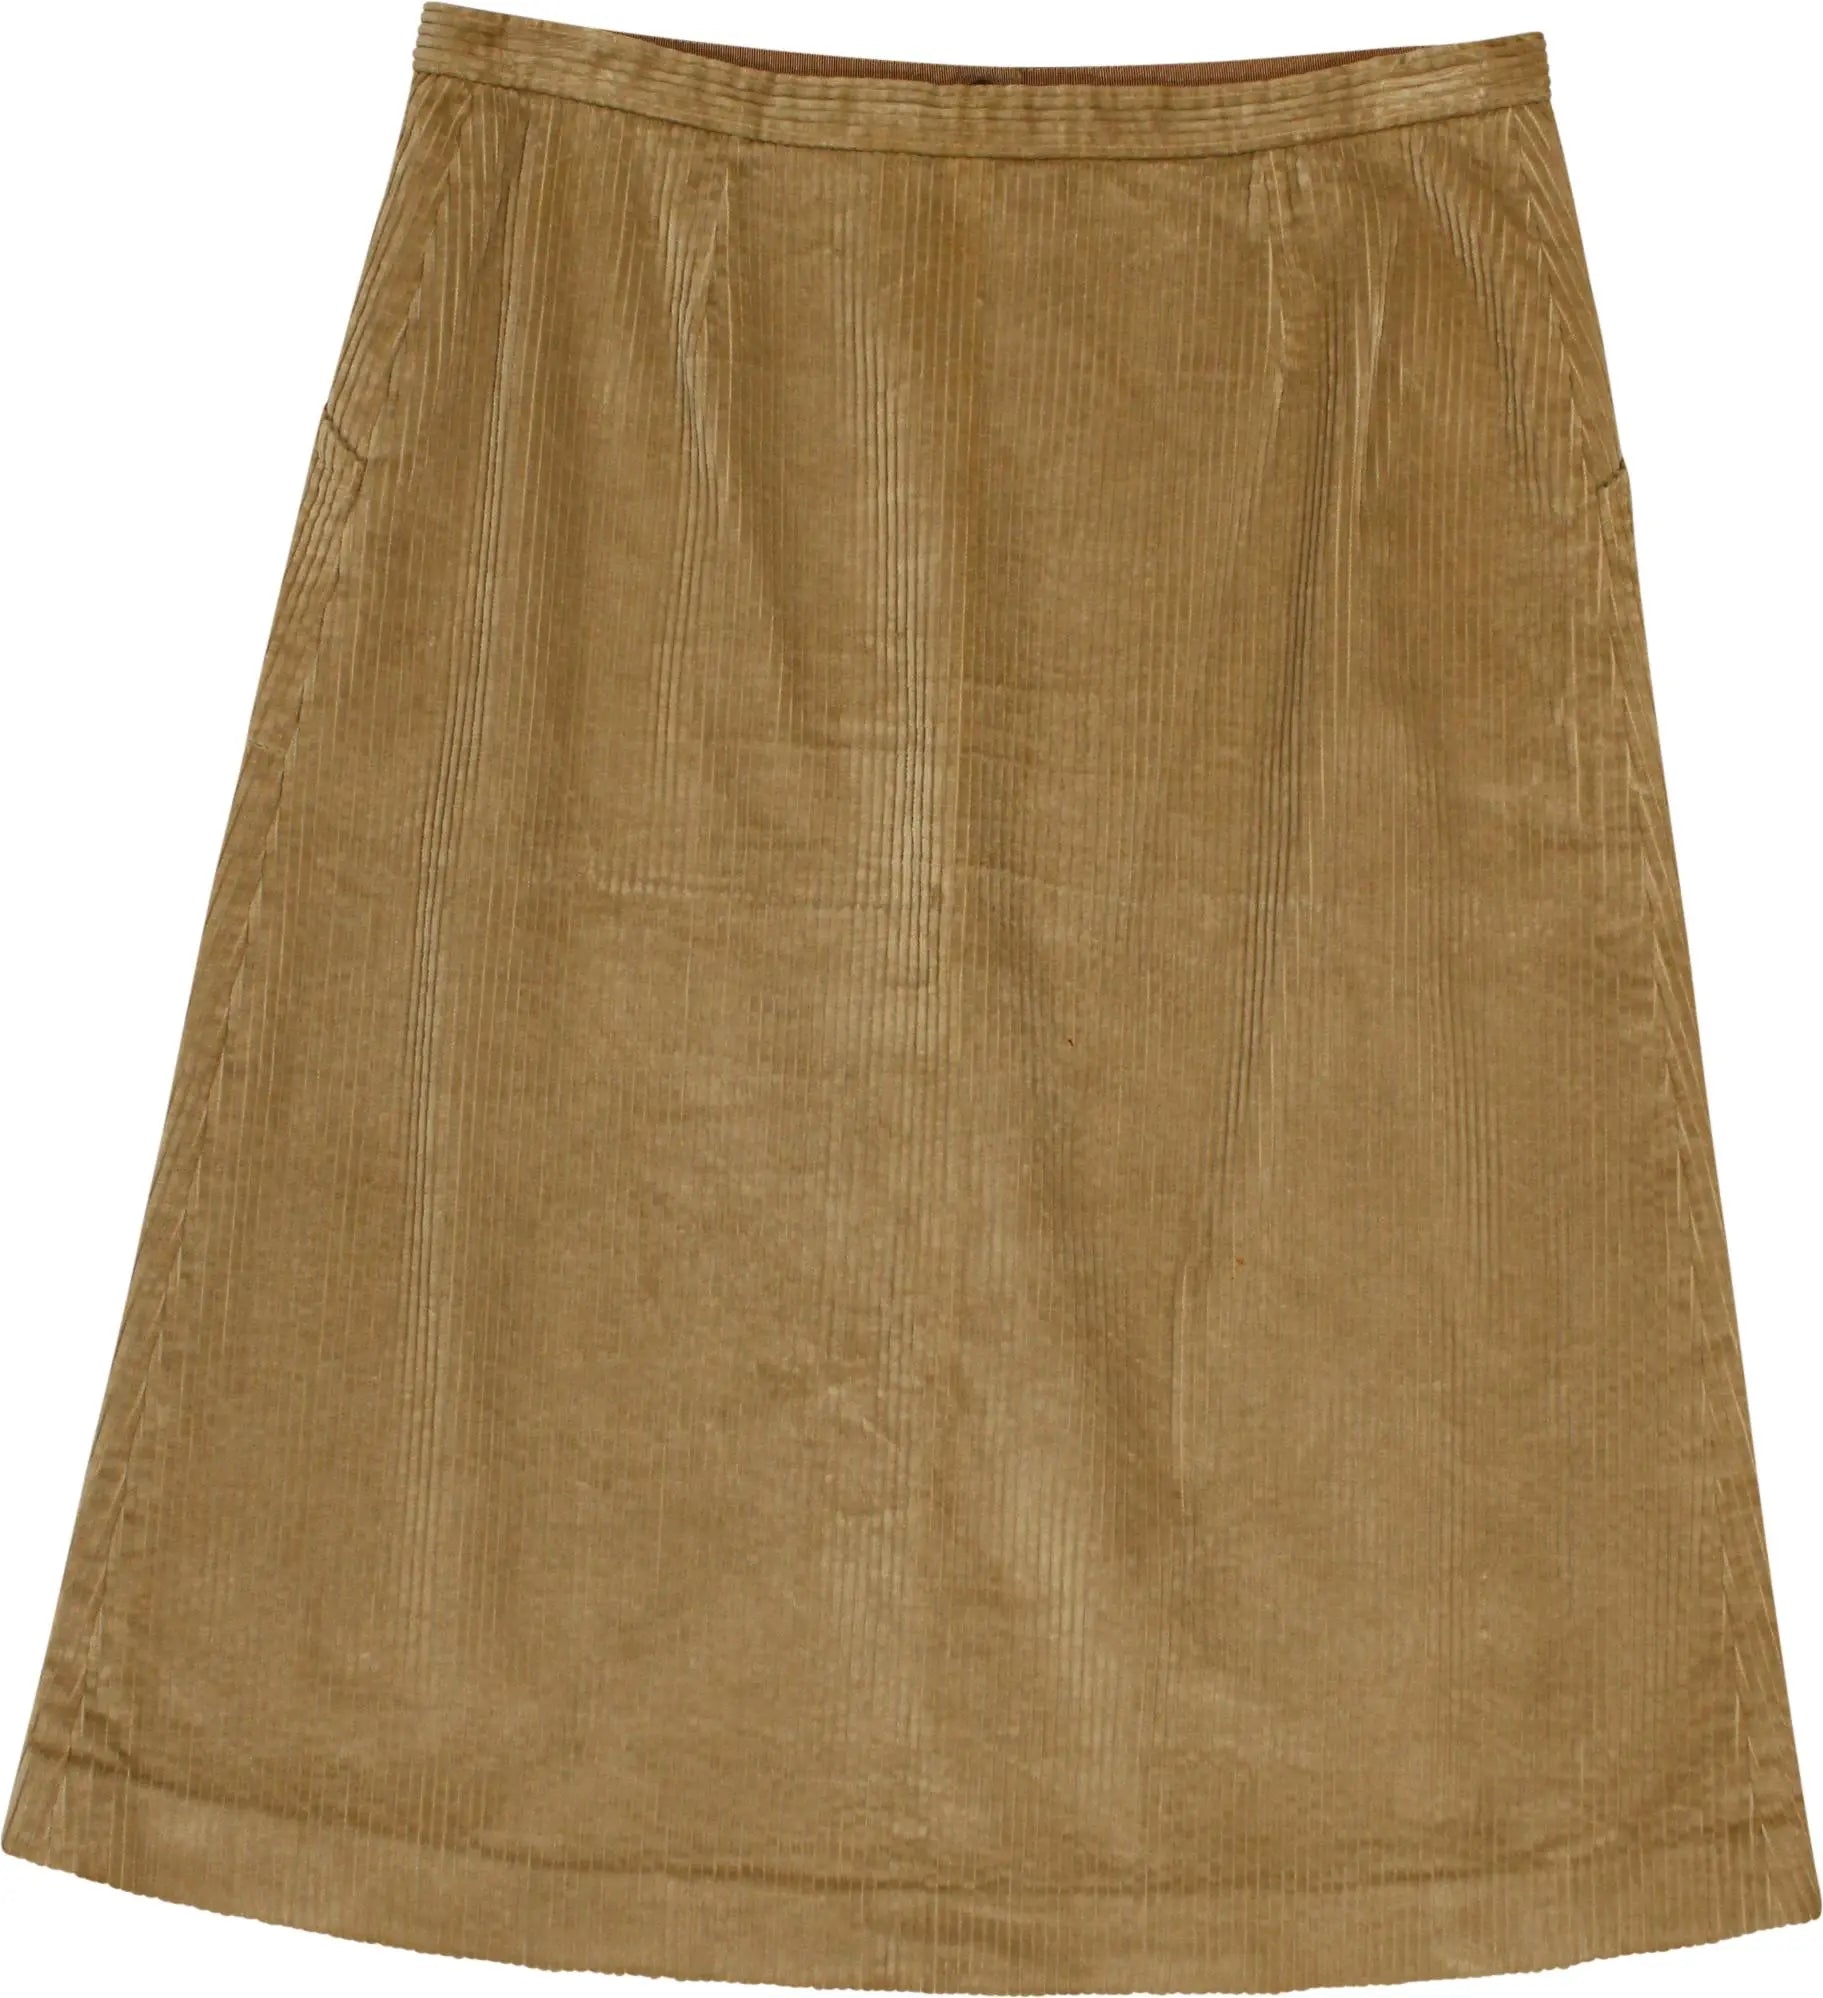 Unknown - Corduroy Skirt- ThriftTale.com - Vintage and second handclothing